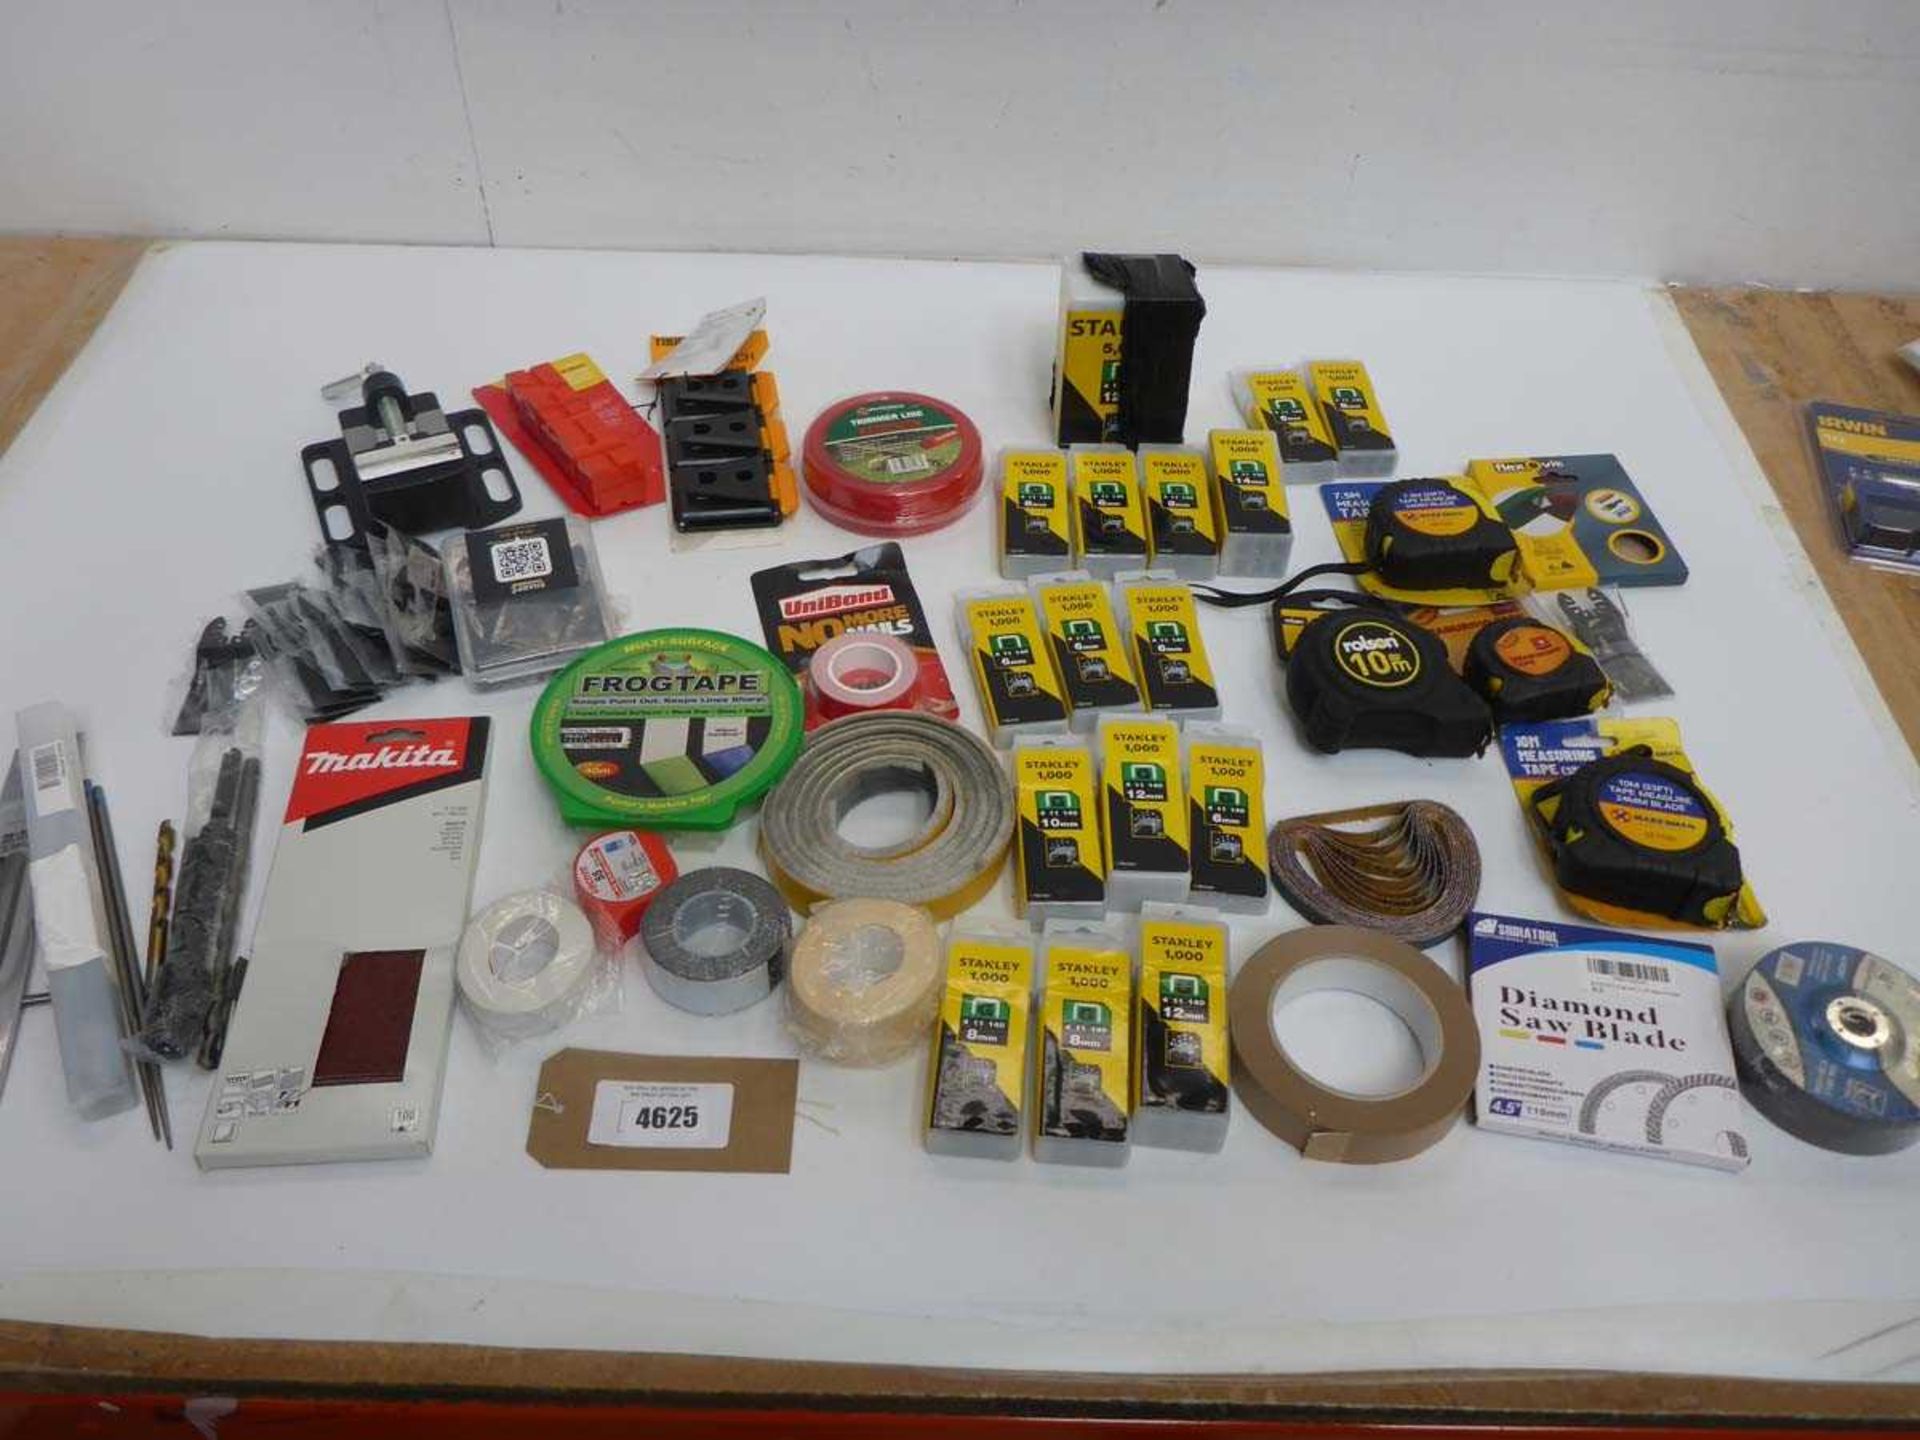 +VAT Tape measures, Stanley staples, multi tool blades, vice, strimmer wire, adhesive tapes, sanding